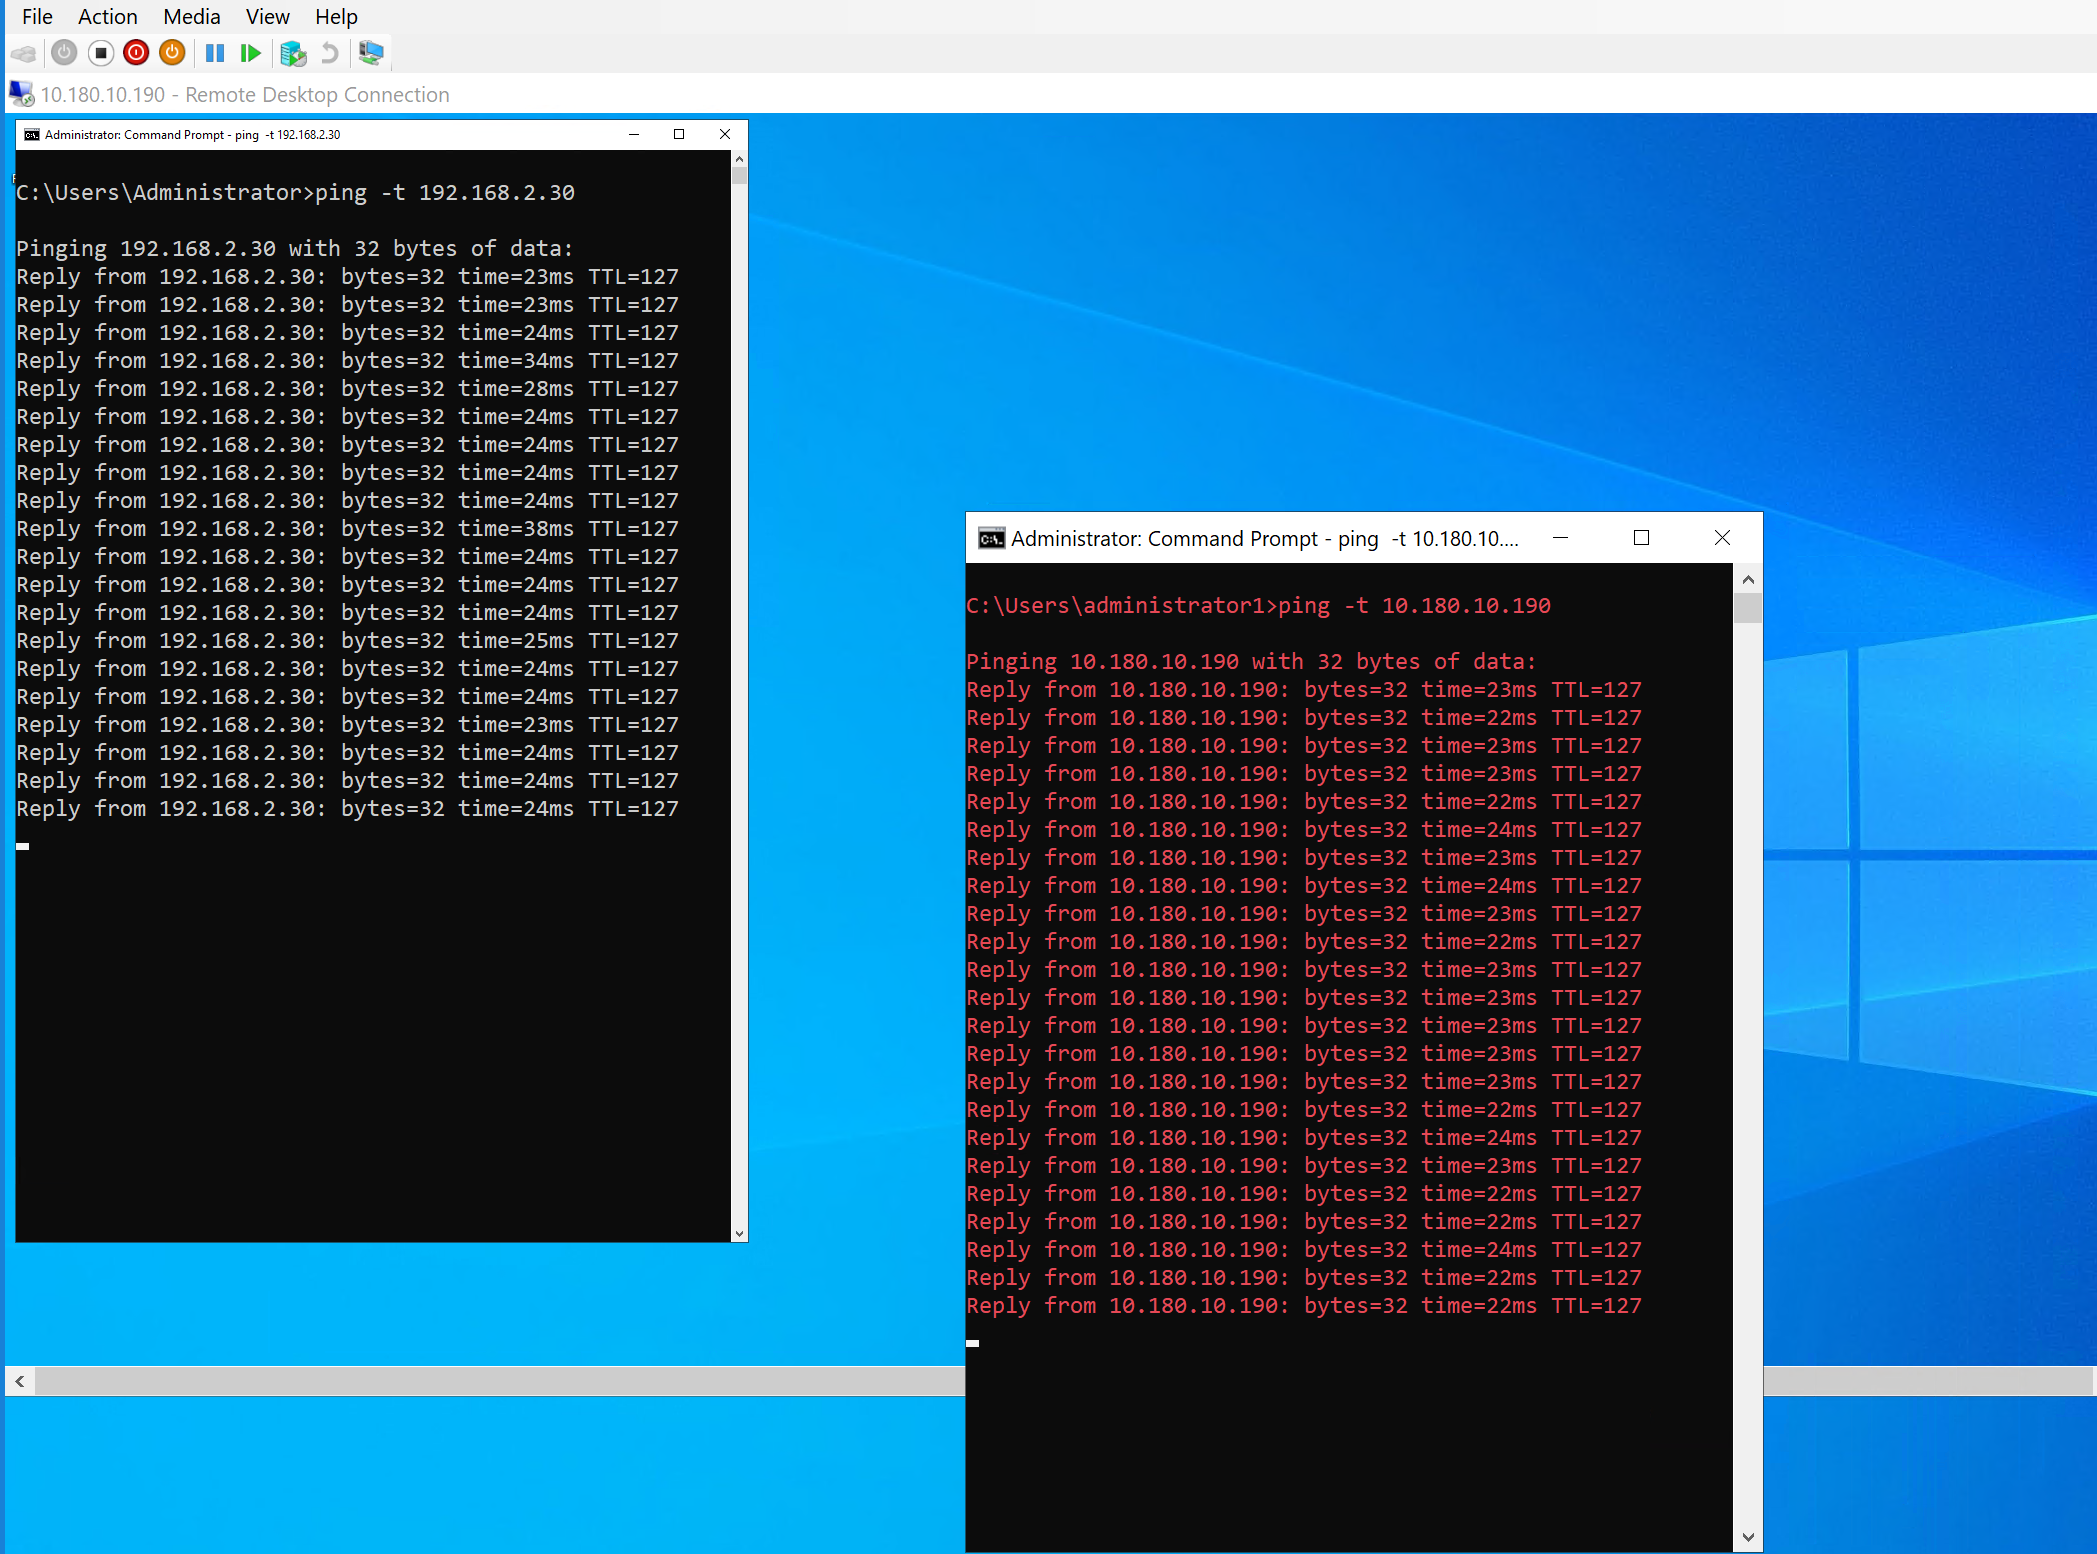 You can see the ping from Azure to on-prem in the white font command prompt and from on-prem to Azure in the red font command prompt